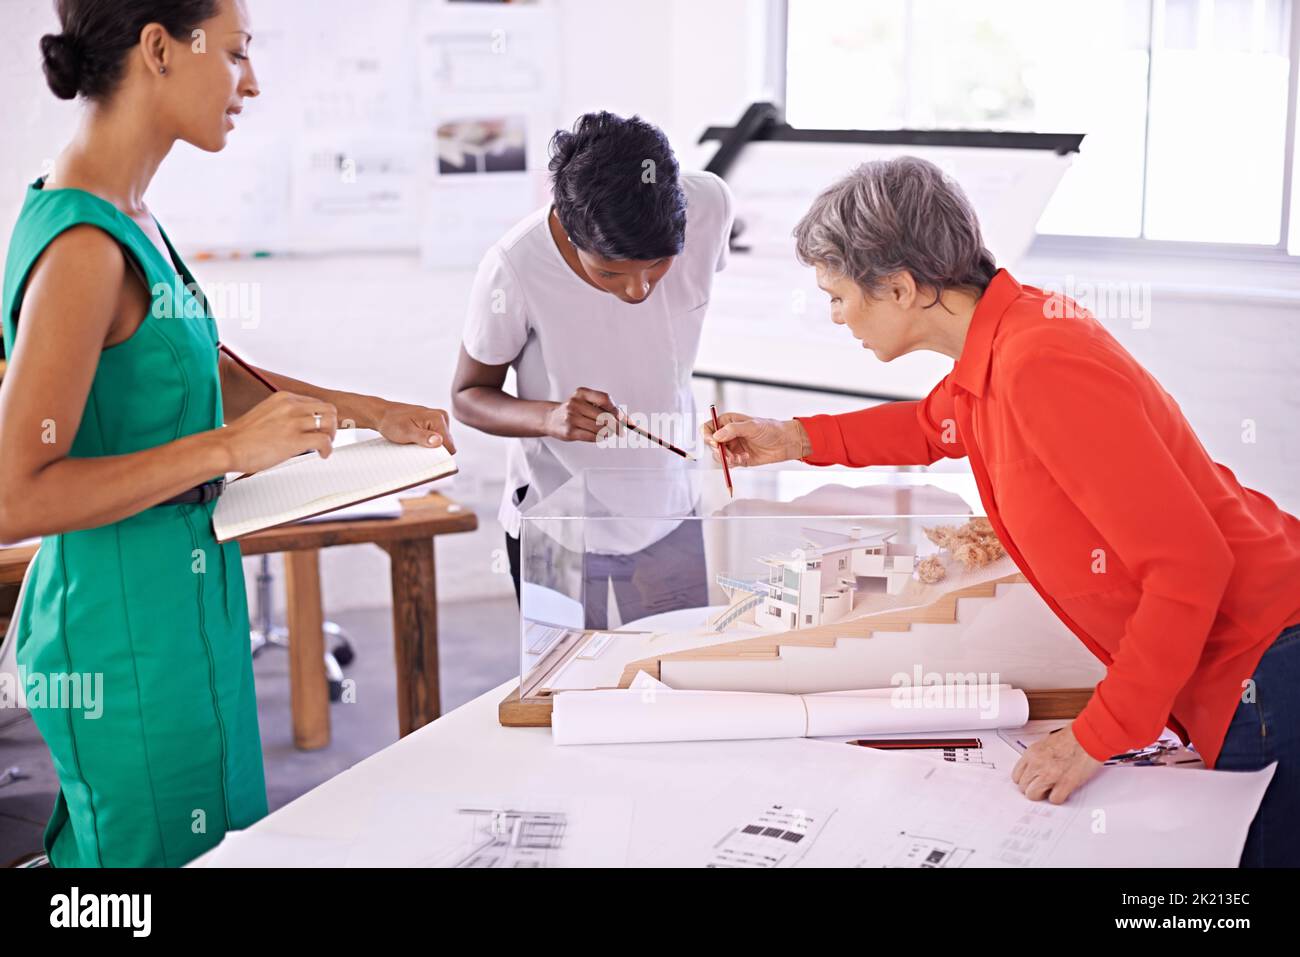 Going over the finer details. a group of female architects working together on a project. Stock Photo